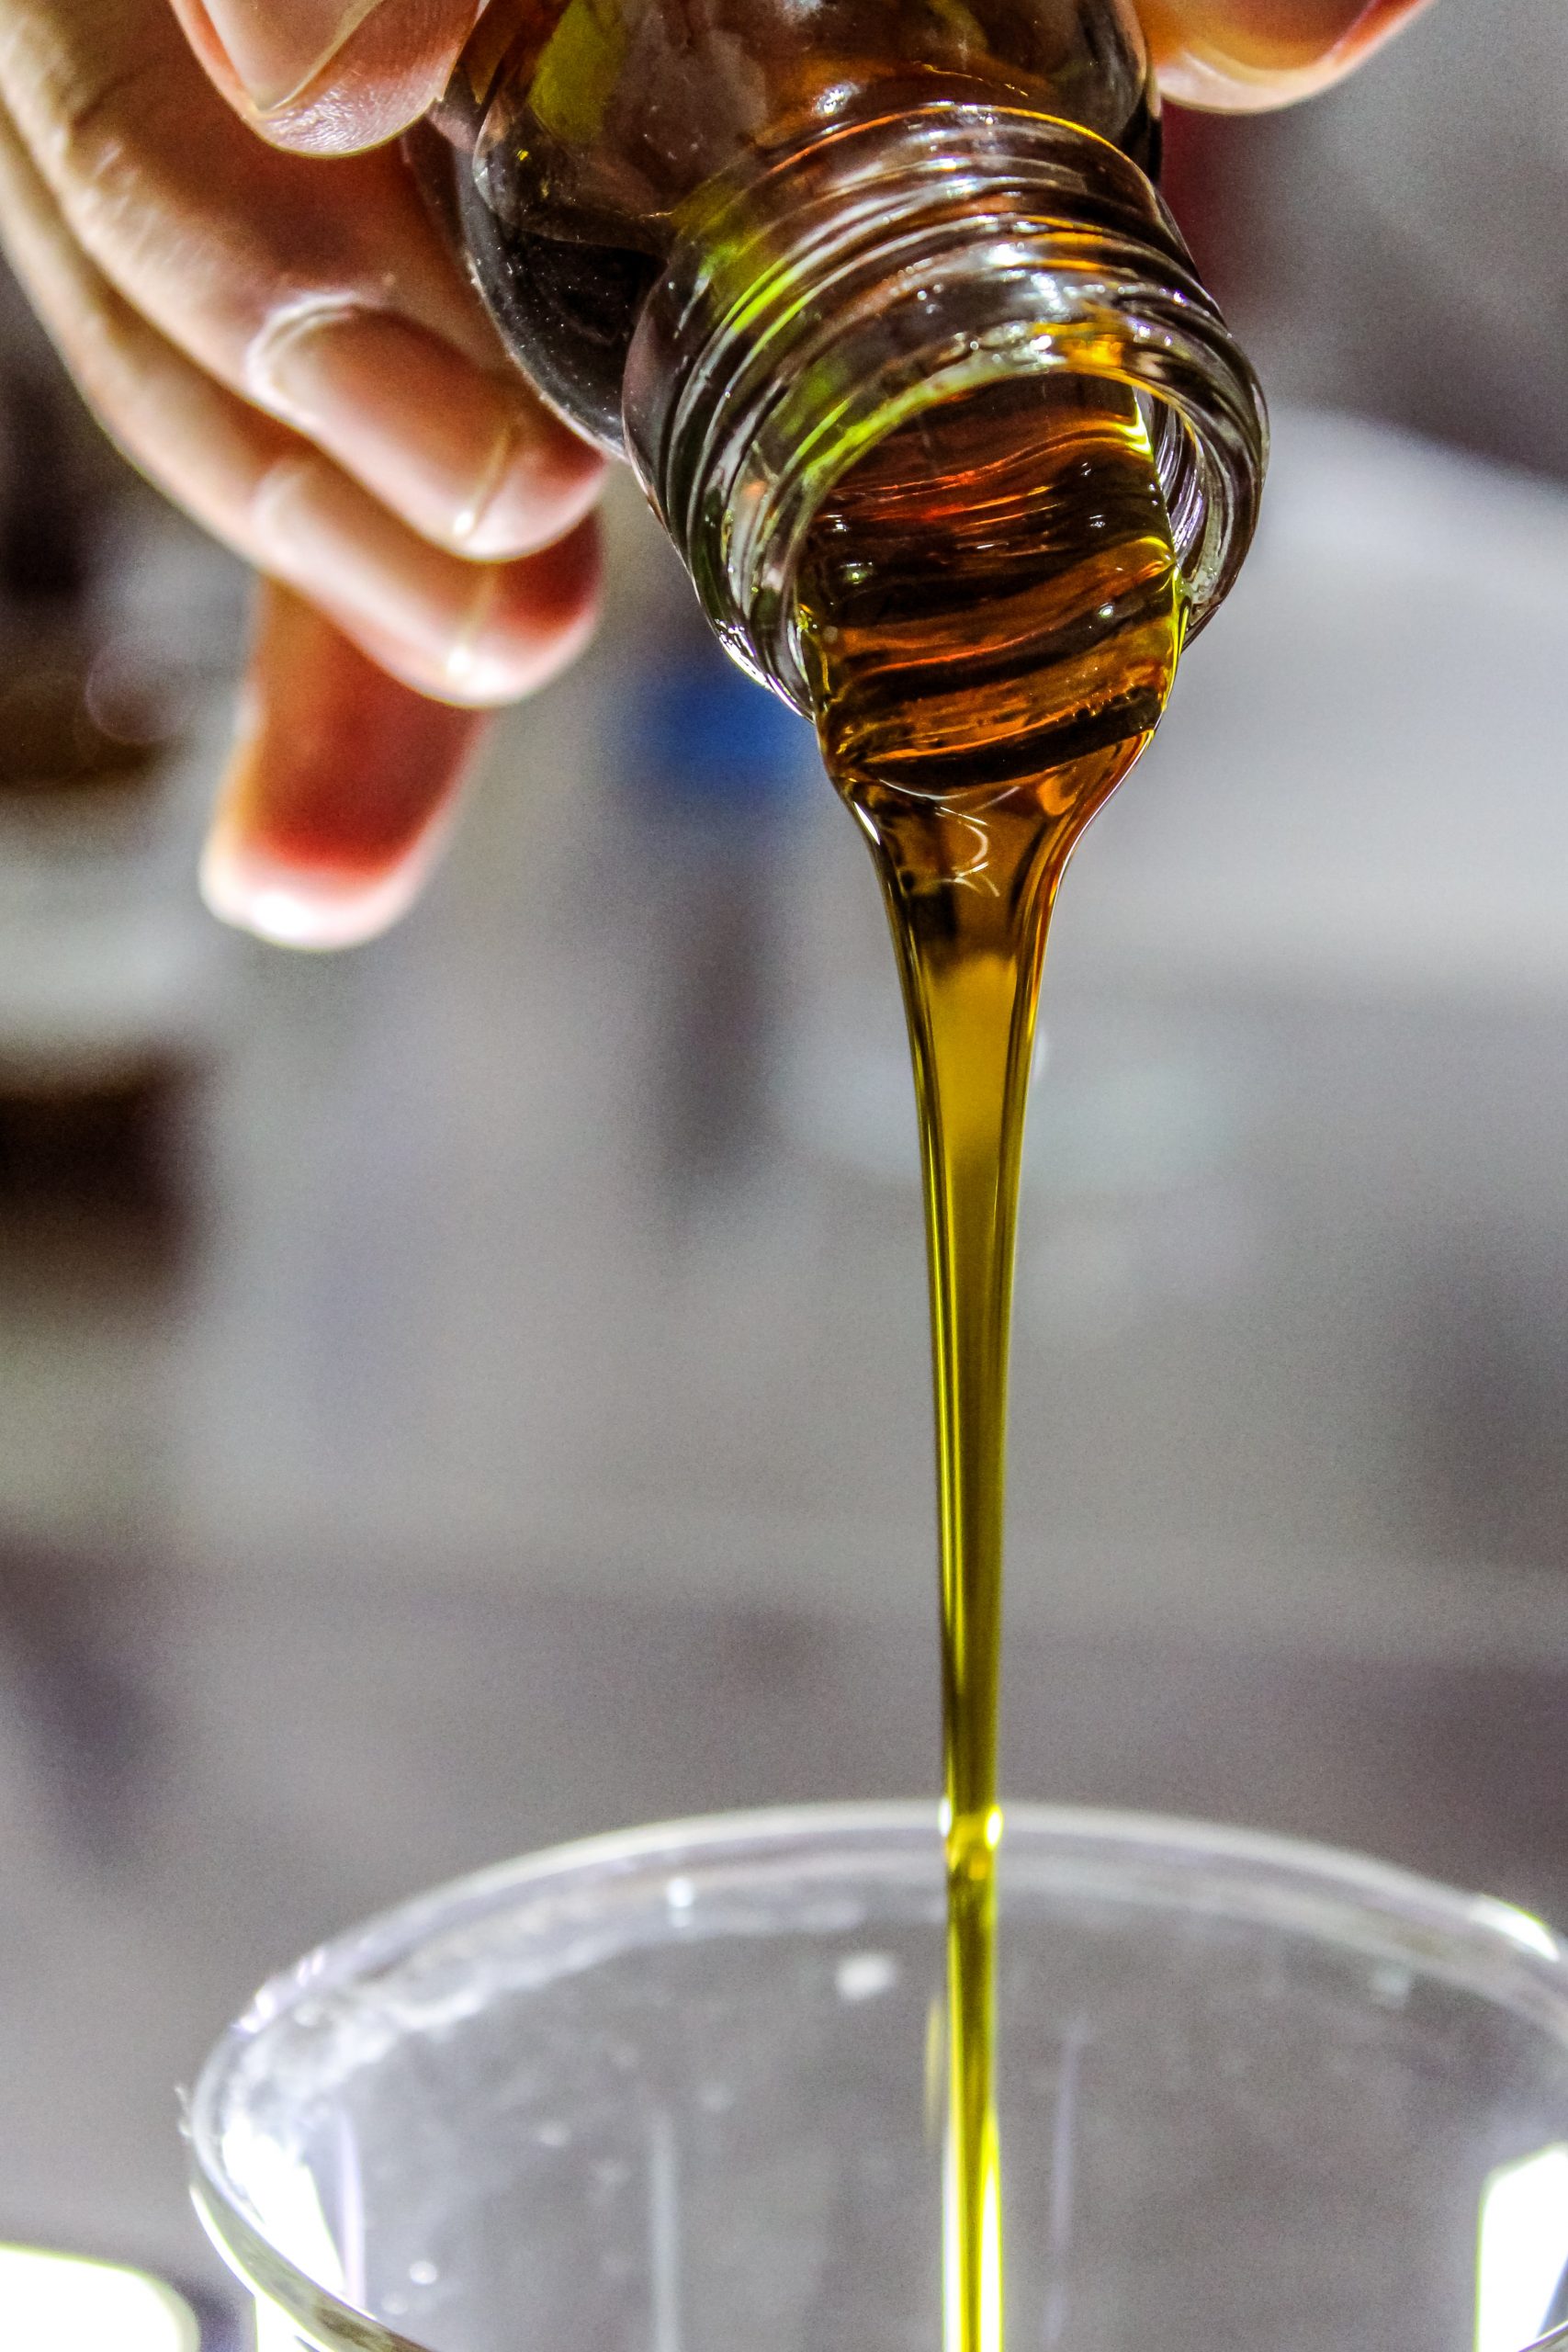 Different types of plant-based oils